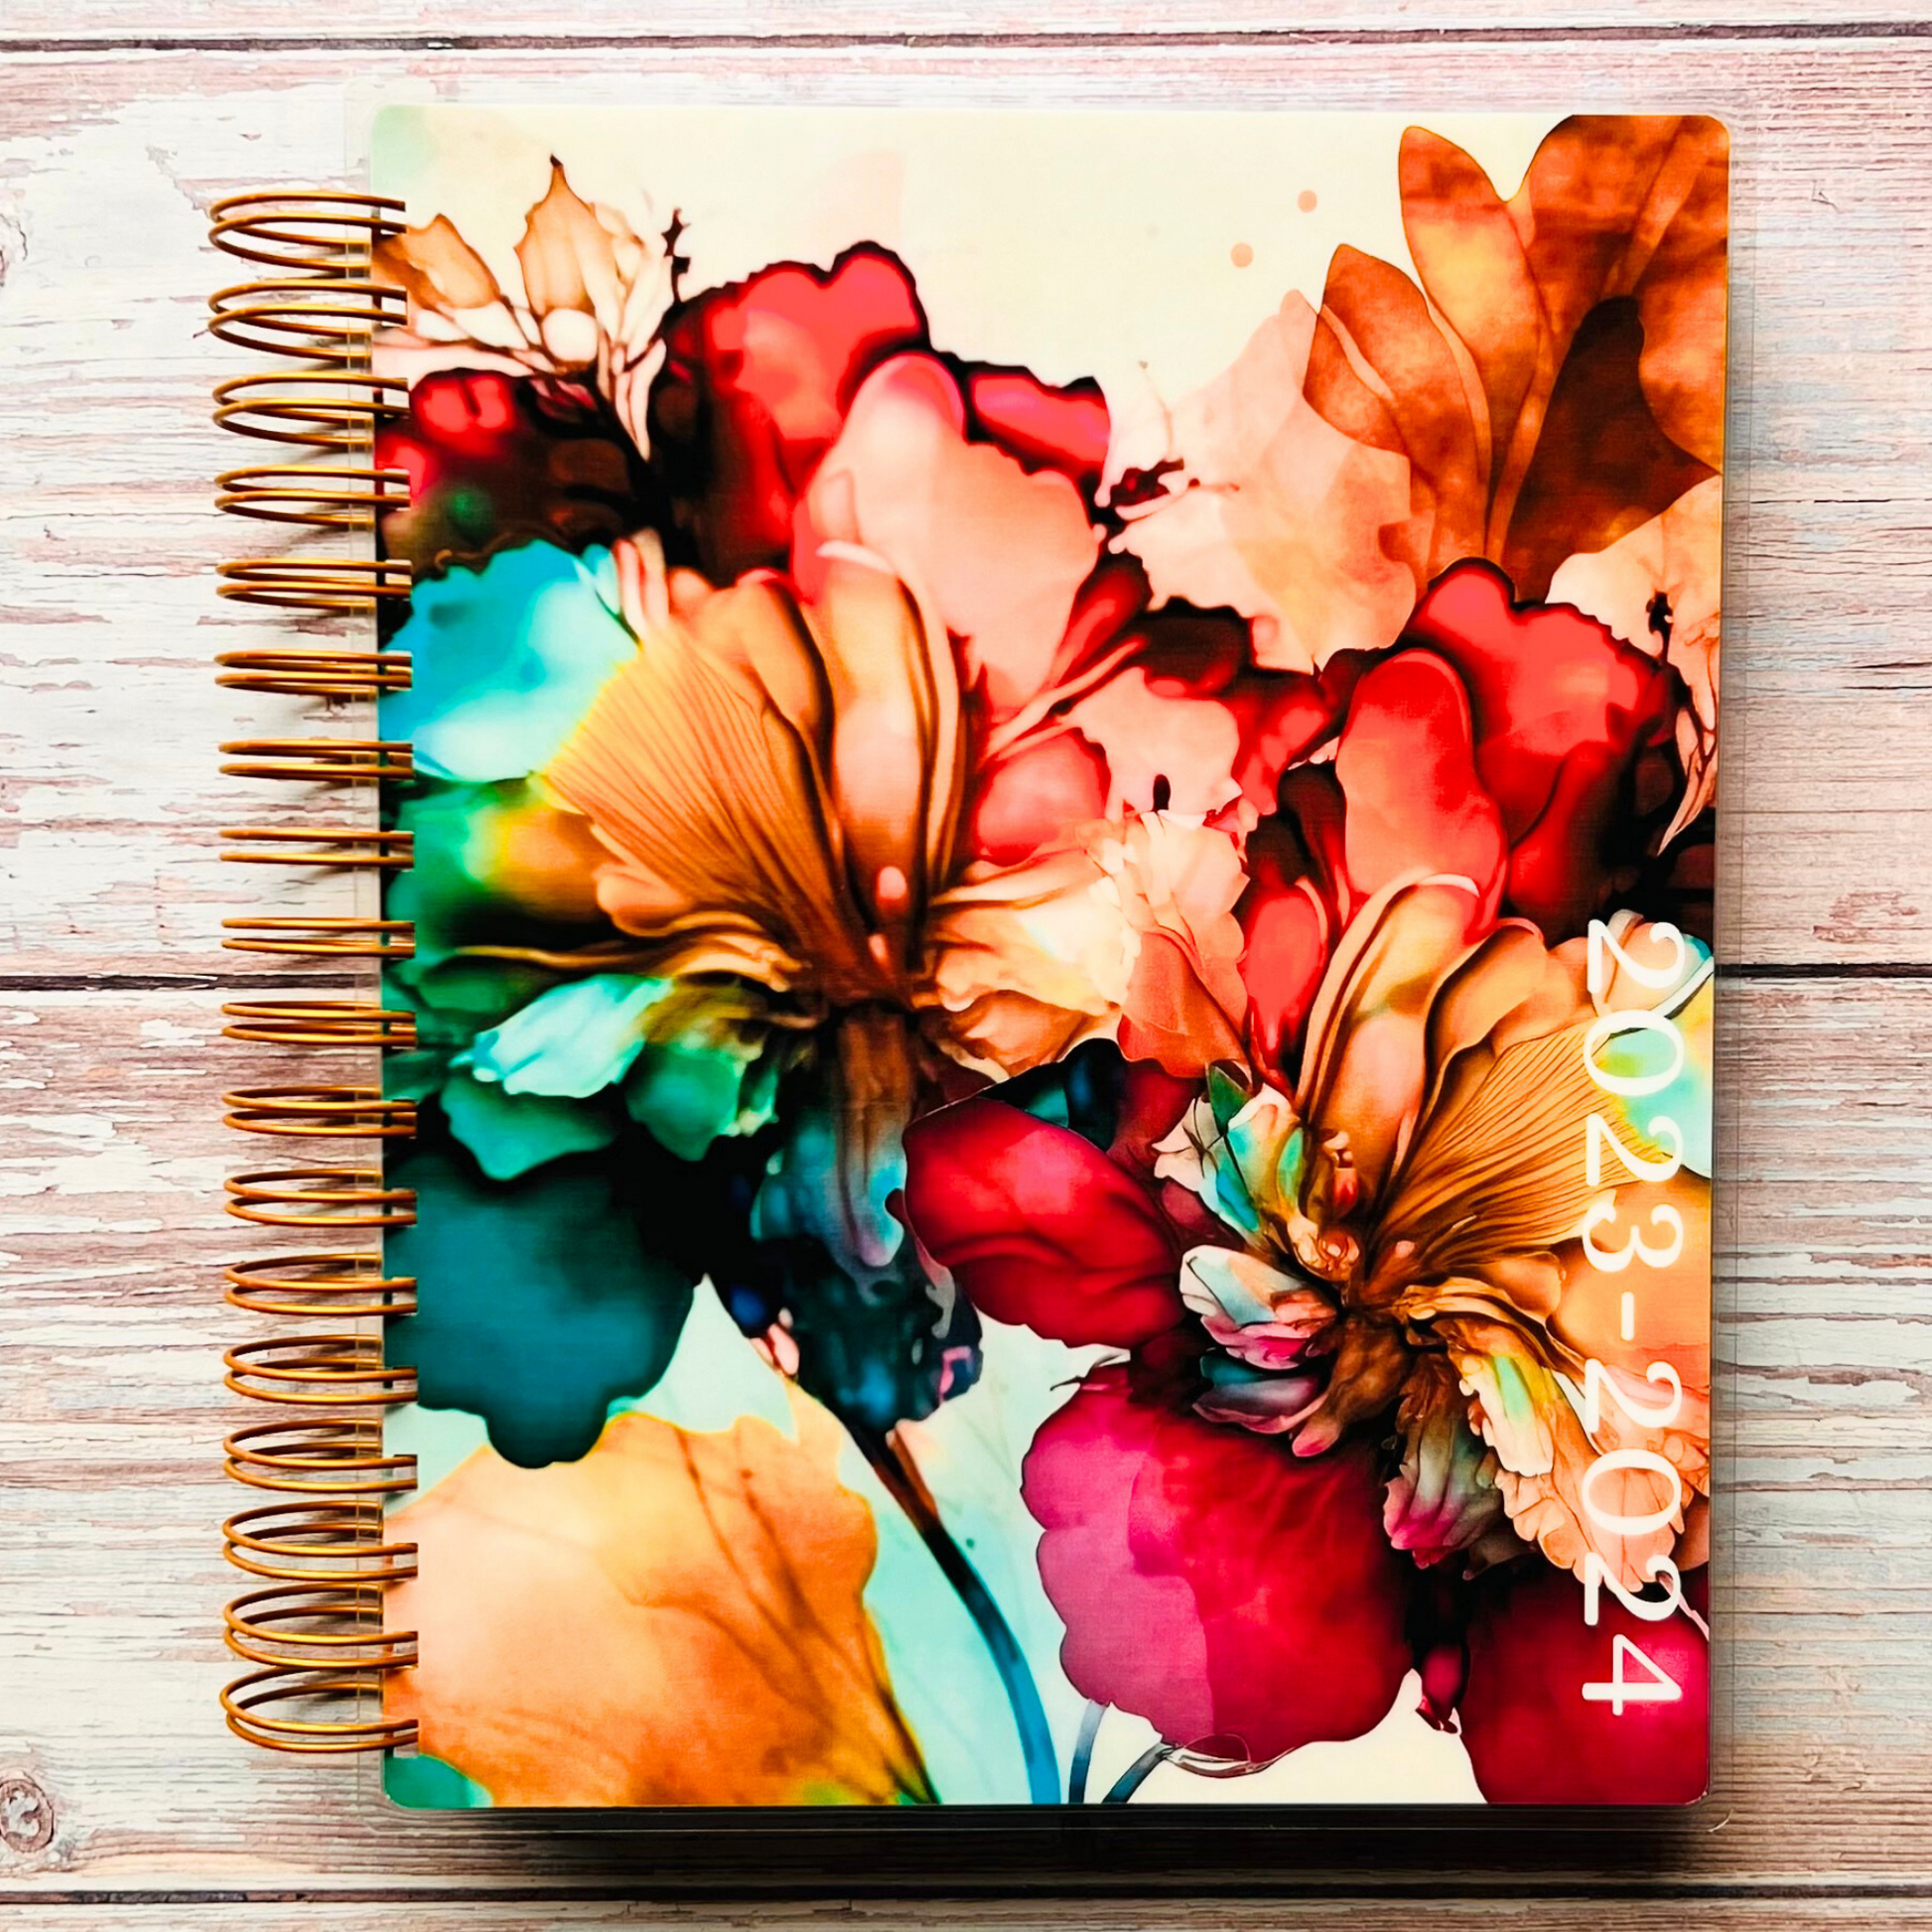 2023-2024 Personalized Monthly Planner - Abstract Flowers Monthly Planners Artful Planner Co. 